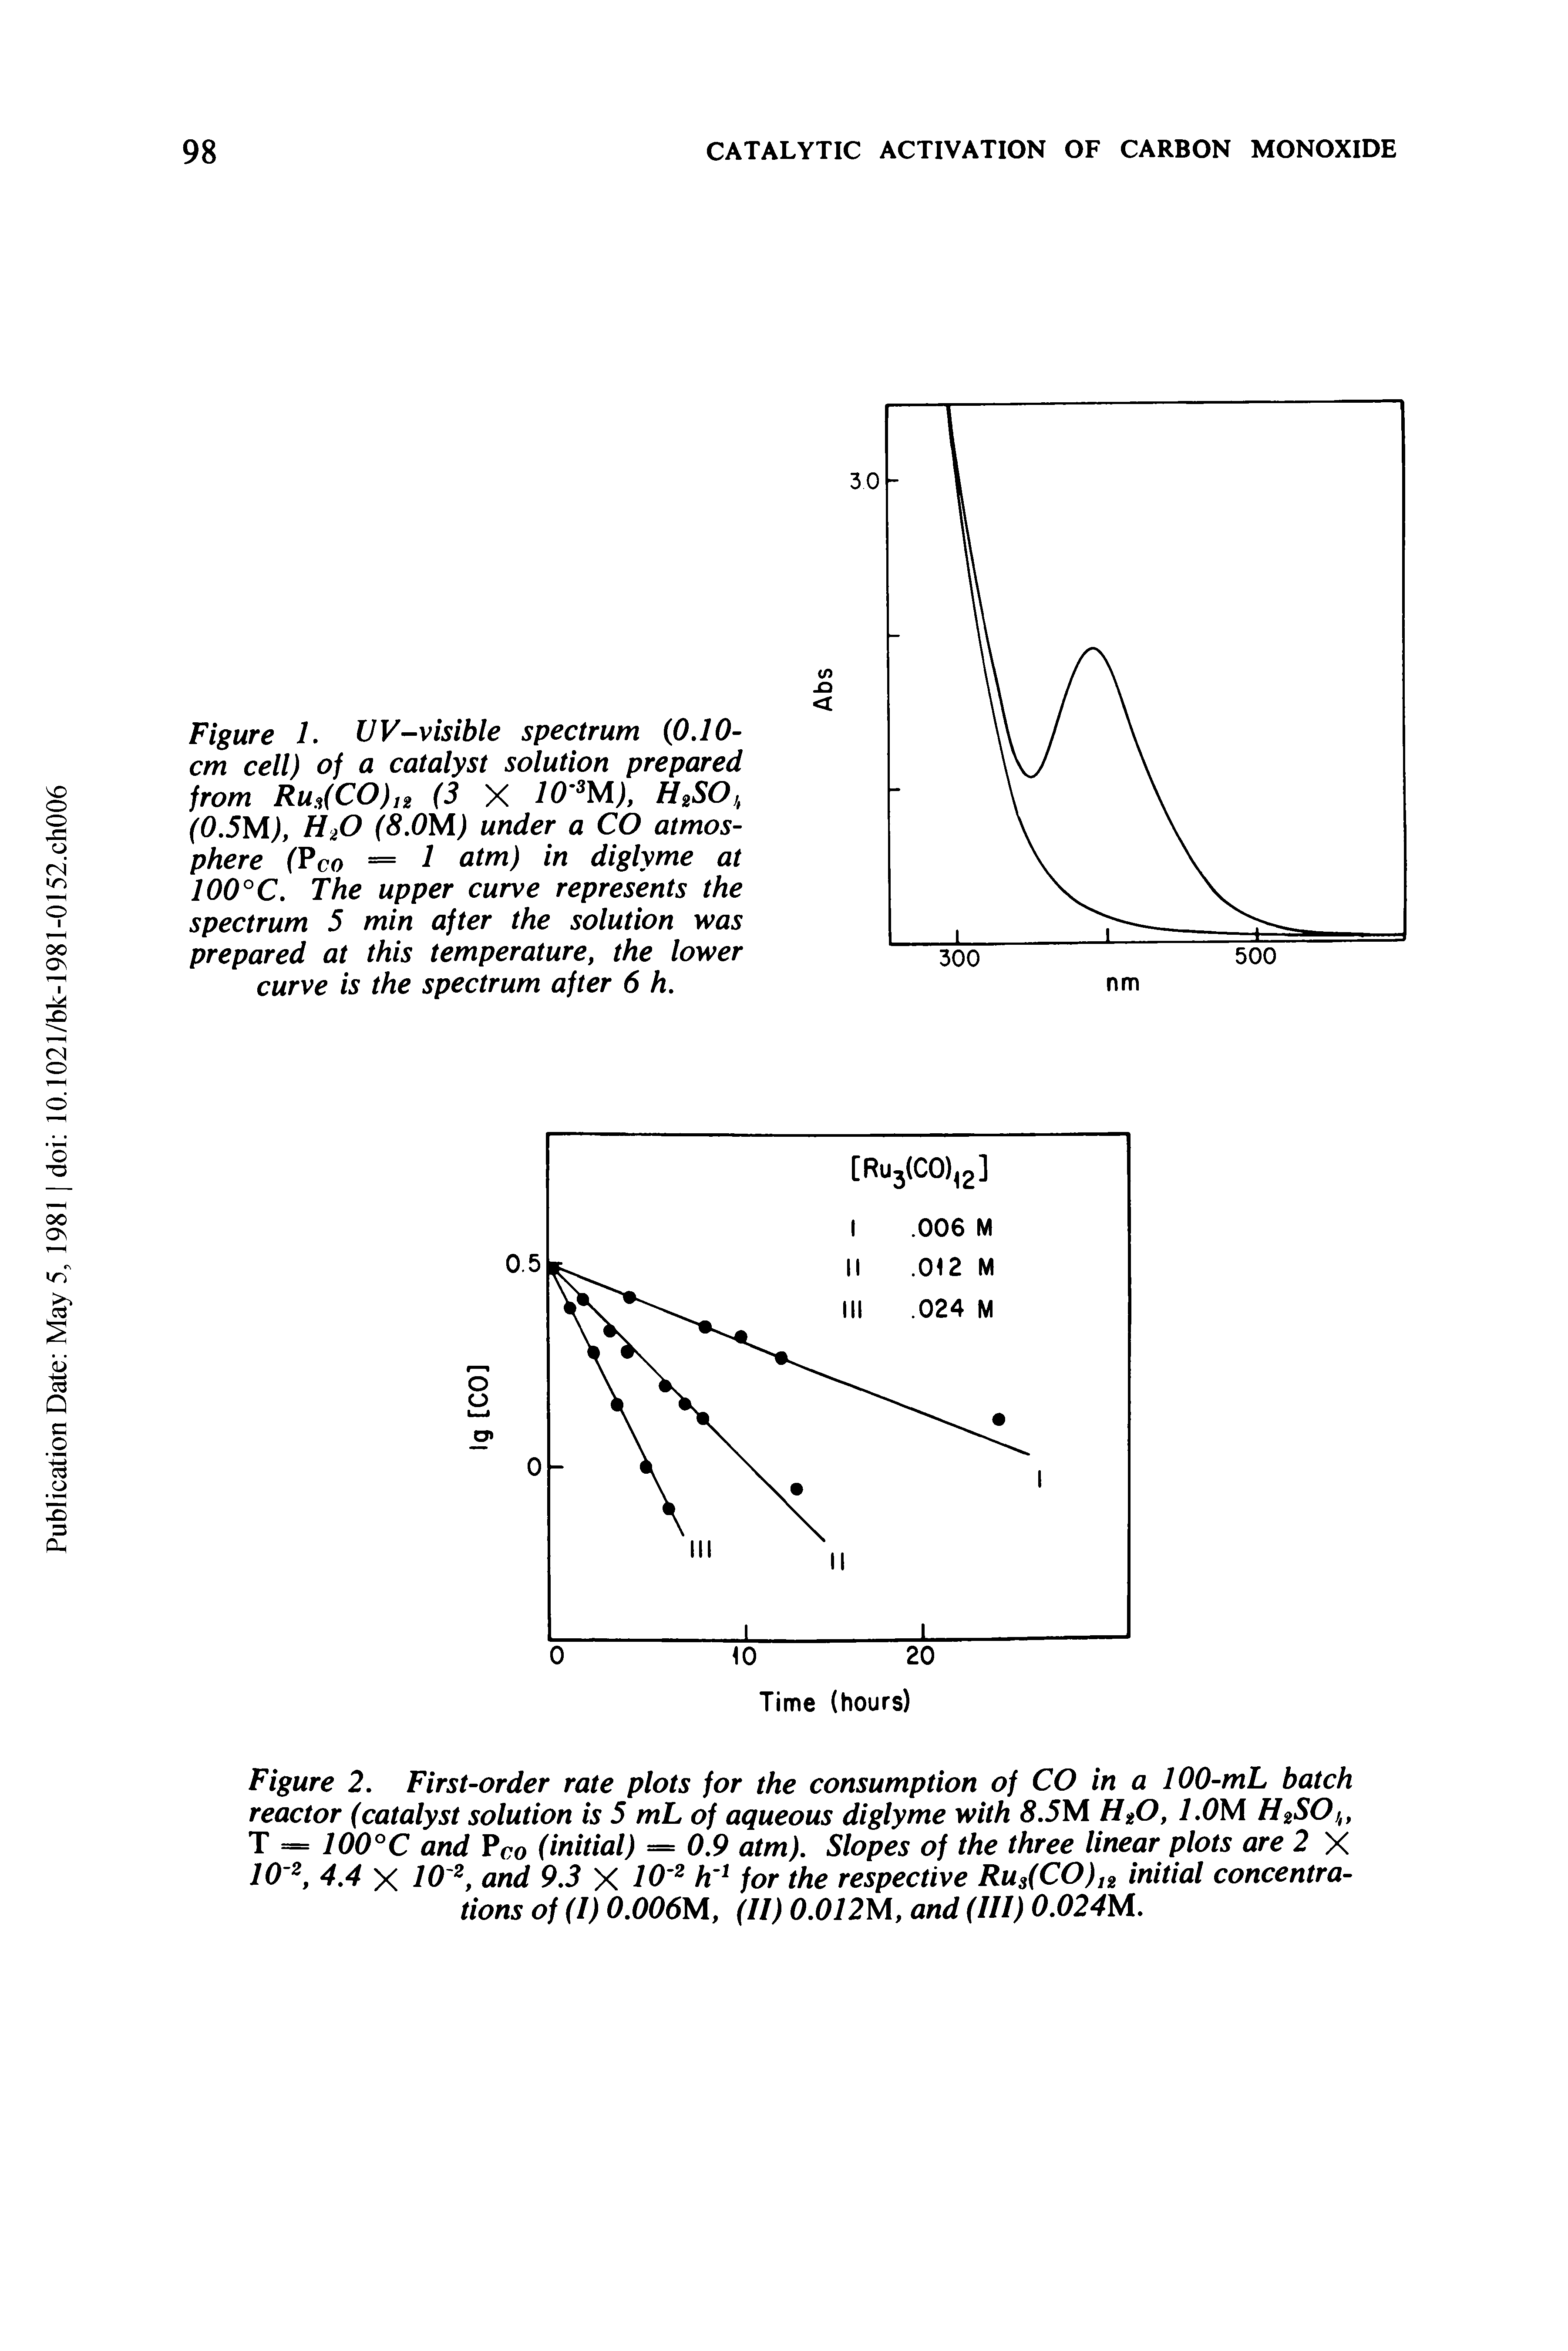 Figure 2. First-order rate plots for the consumption of CO in a 100-mL batch reactor (catalyst solution is 5 mL of aqueous diglyme with .5M HtO, 1.0M H2SO,lf T = 100°C and Pco (initial) = 0.9 atm). Slopes of the three linear plots are 2 X 10 2, 4.4 X JO 2, and 9.3 X JO 2 hr1 for the respective Ru (CO)I2 initial concentrations of (I) 0.006M, (II) 0.012U, and (III) 0.024U.